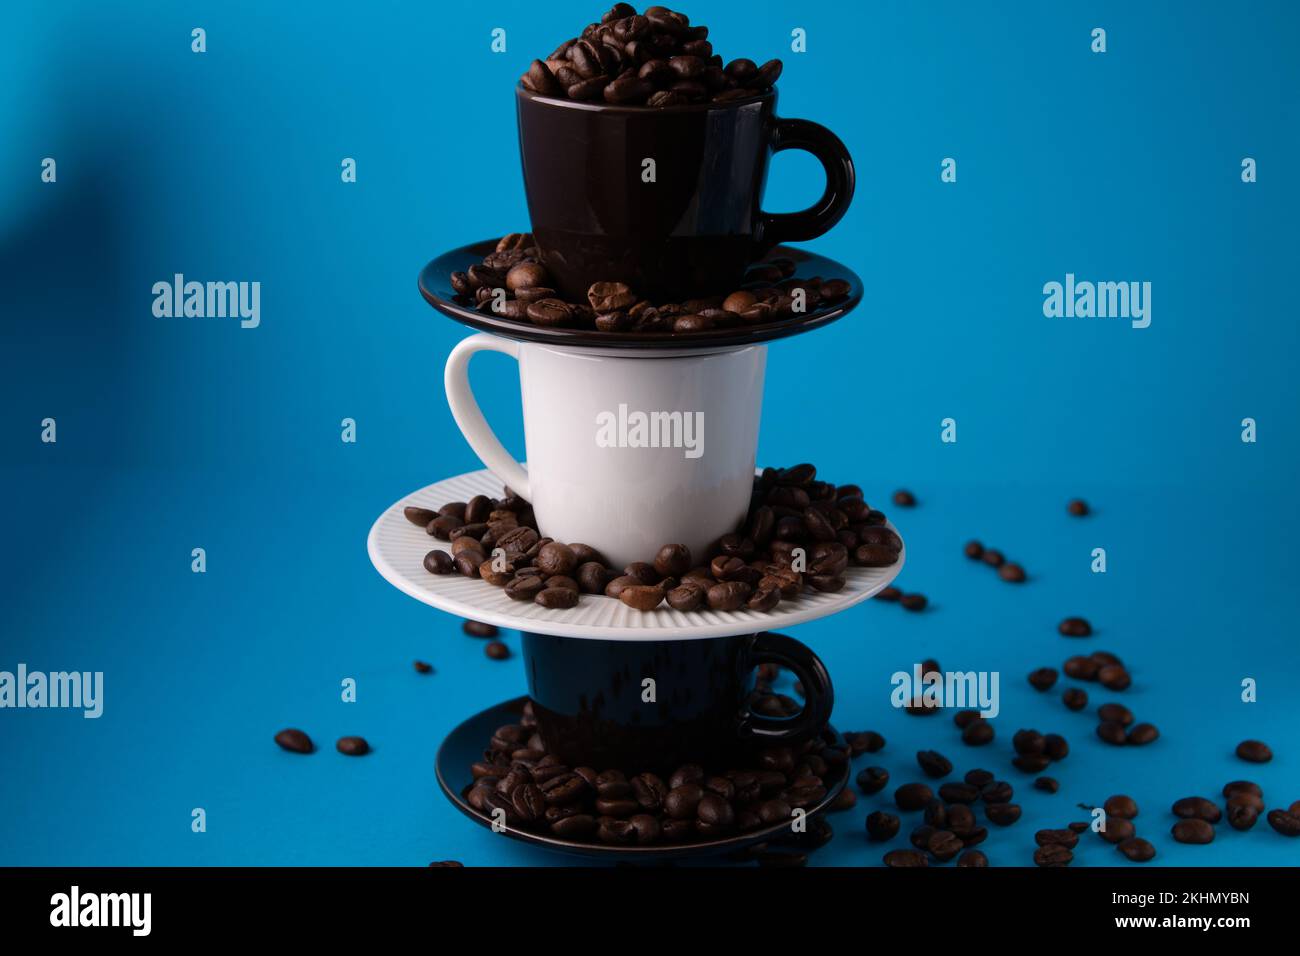 https://c8.alamy.com/comp/2KHMYBN/photo-of-a-cup-with-coffee-beans-on-top-of-a-pyramid-of-cups-2KHMYBN.jpg